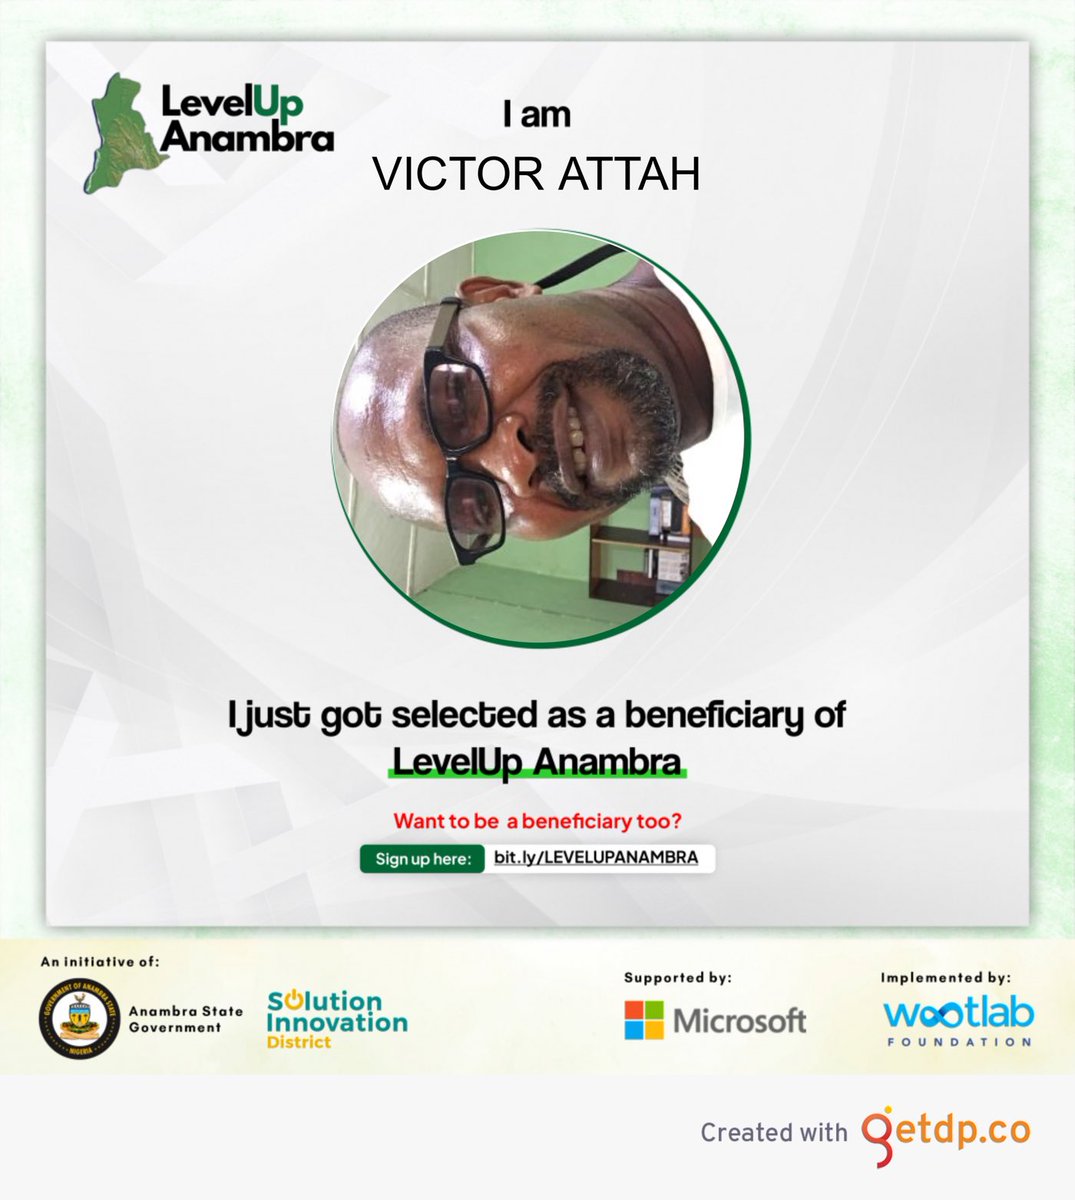 LevelUp Anambra digital skills training powered by the Anambra state government through the solution innovation district SID and implemented by Wootlab foundation in partnership with Microsoft.